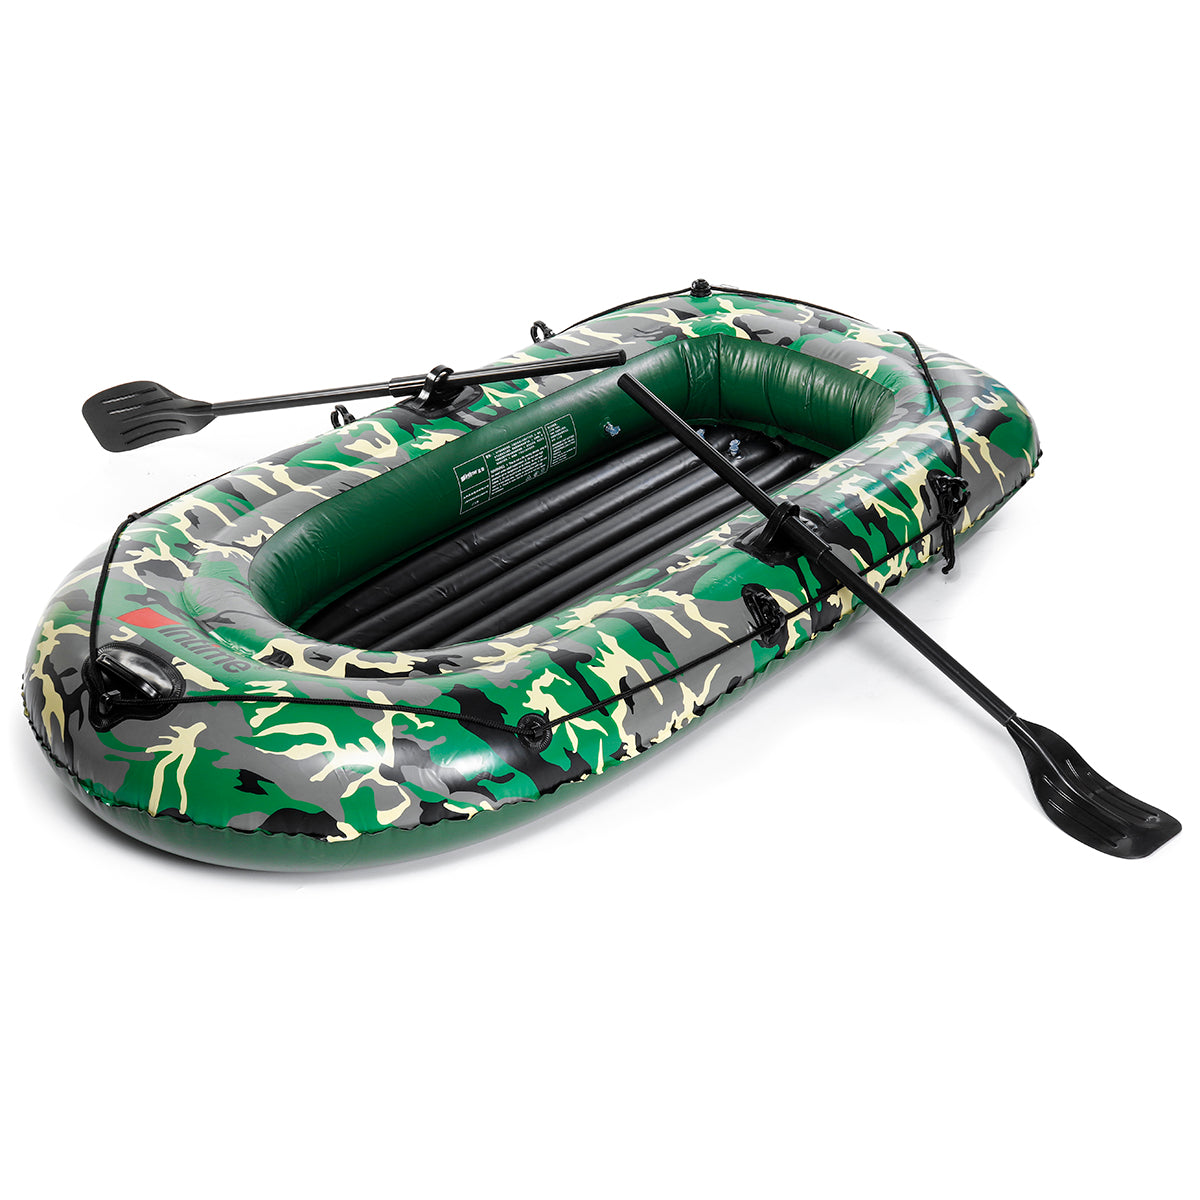 Dim Gray Two Person Inflatable Fishing Boat Thickened Rubber Kayak Boat With Inflatable Pump Outdoor